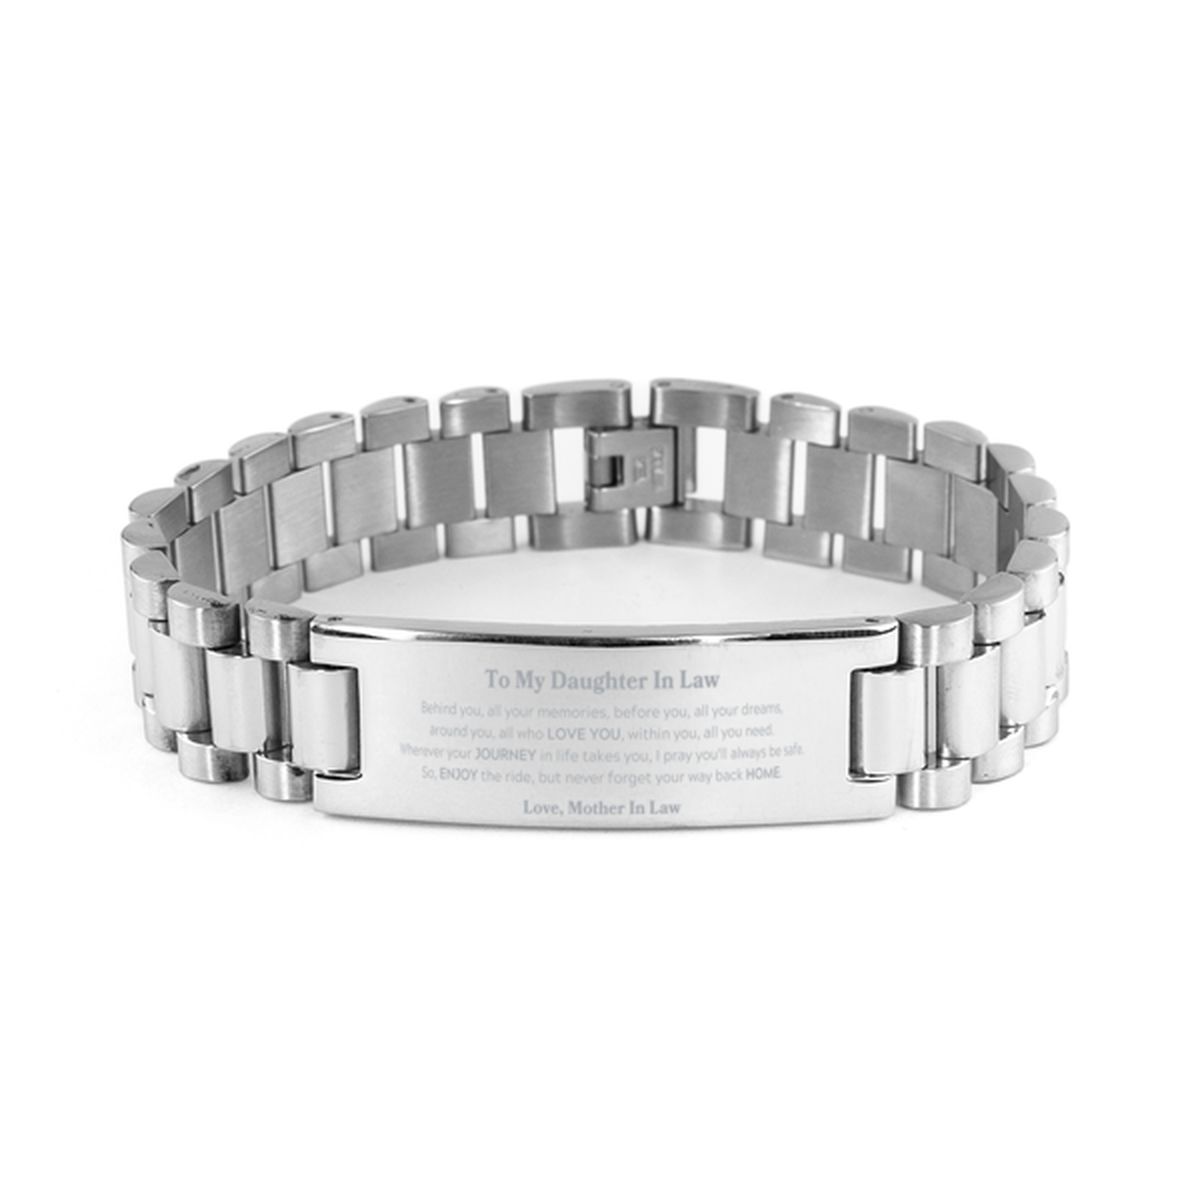 To My Daughter In Law Graduation Gifts from Mother In Law, Daughter In Law Ladder Stainless Steel Bracelet Christmas Birthday Gifts for Daughter In Law Behind you, all your memories, before you, all your dreams. Love, Mother In Law